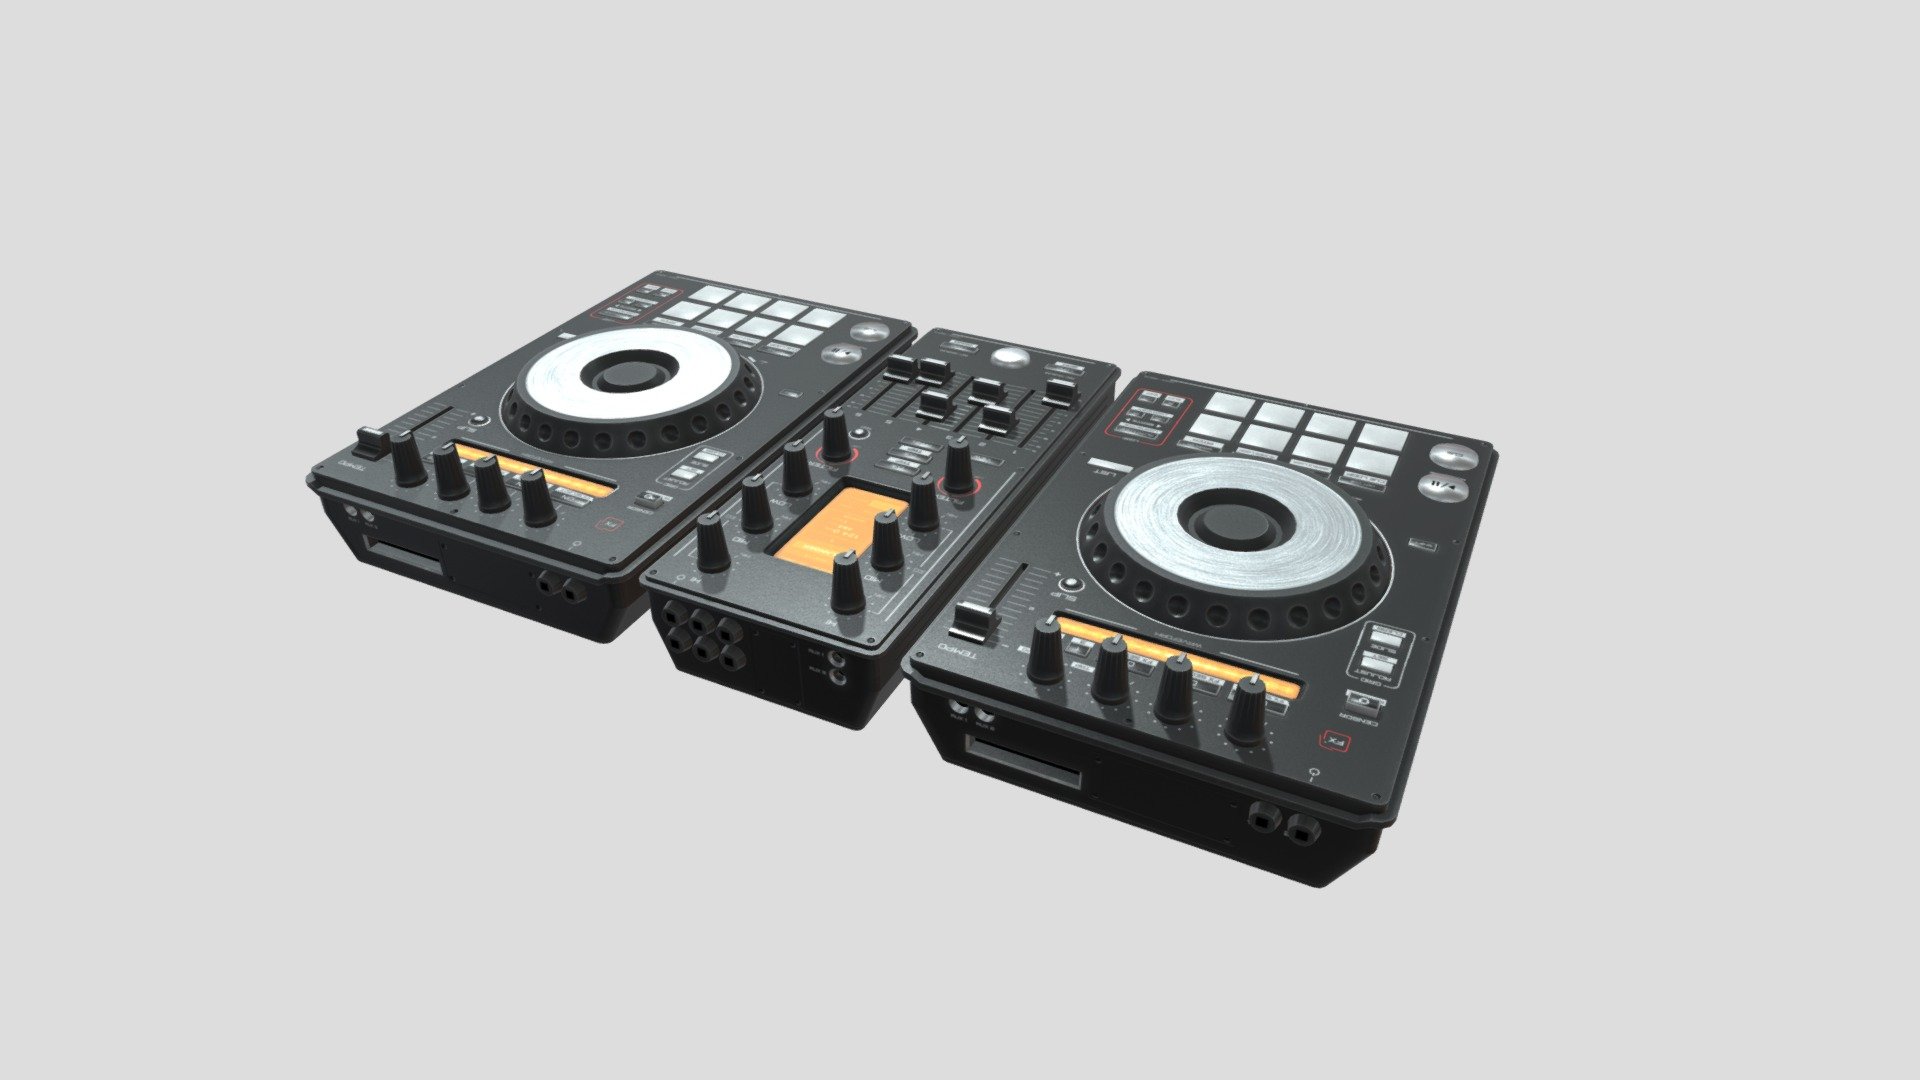 This DJ Set is perfect for any Music Animation or render, The model is Highly Detailed and UV Unwrapped. The model is Viewable from all angles and distances.

This includes:

The mesh
4K and 2K Texture set (Albedo, Metallic, ROughness, Normal, Height, Emission)
2 Variants ( Black and White Versions)
The model is UV Unwrapped with vertex colors for easy retexturing 3d model